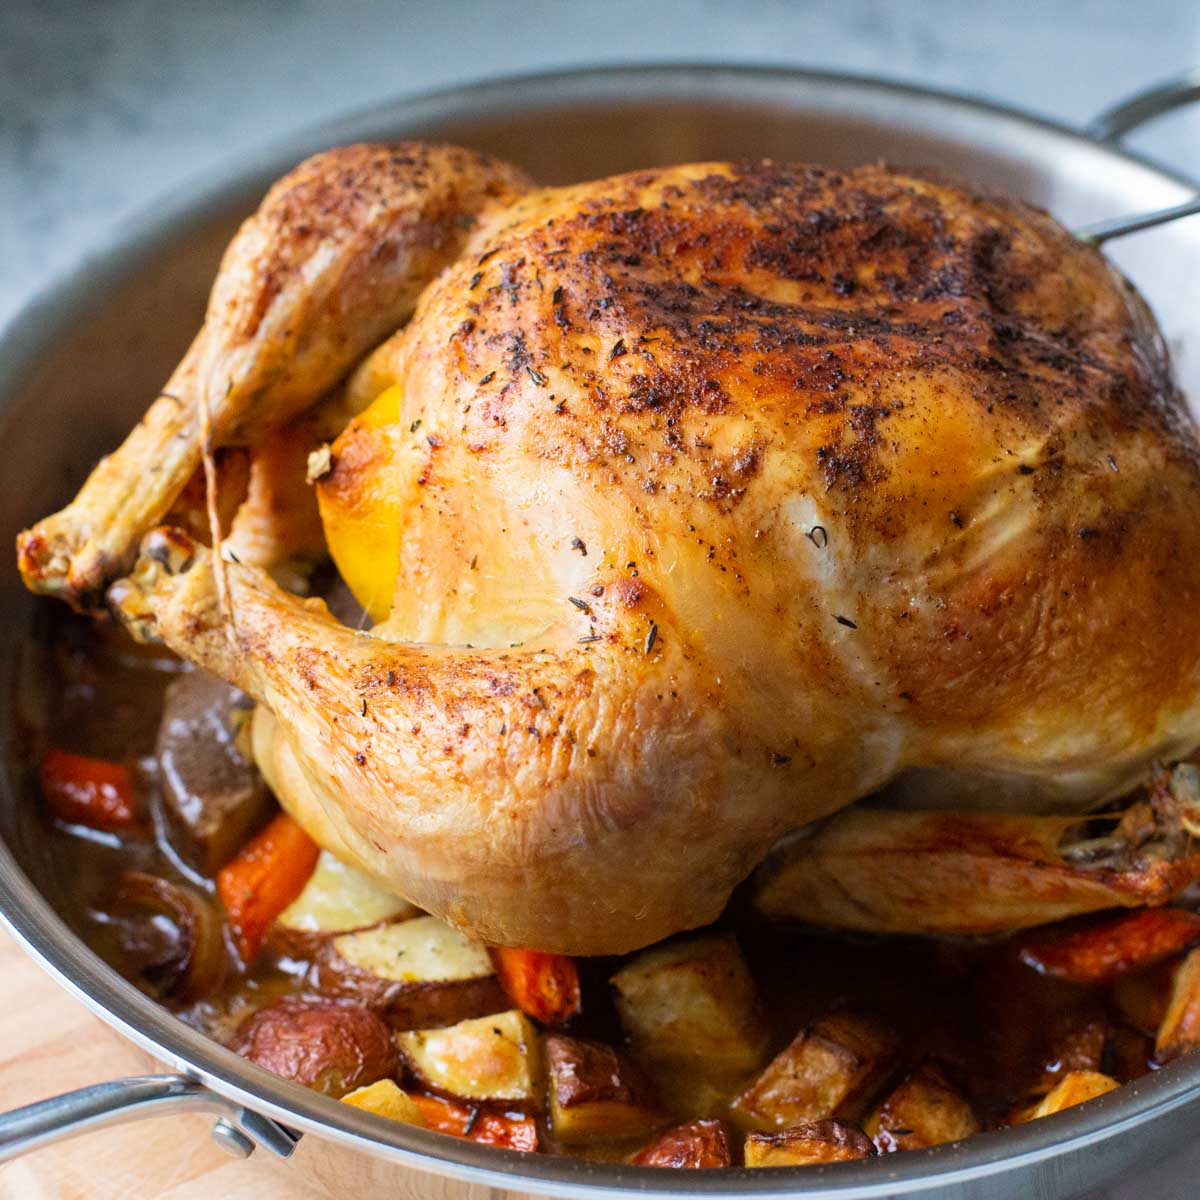 The roasted chicken sits on top of roasted vegetables in a round roasting pan.